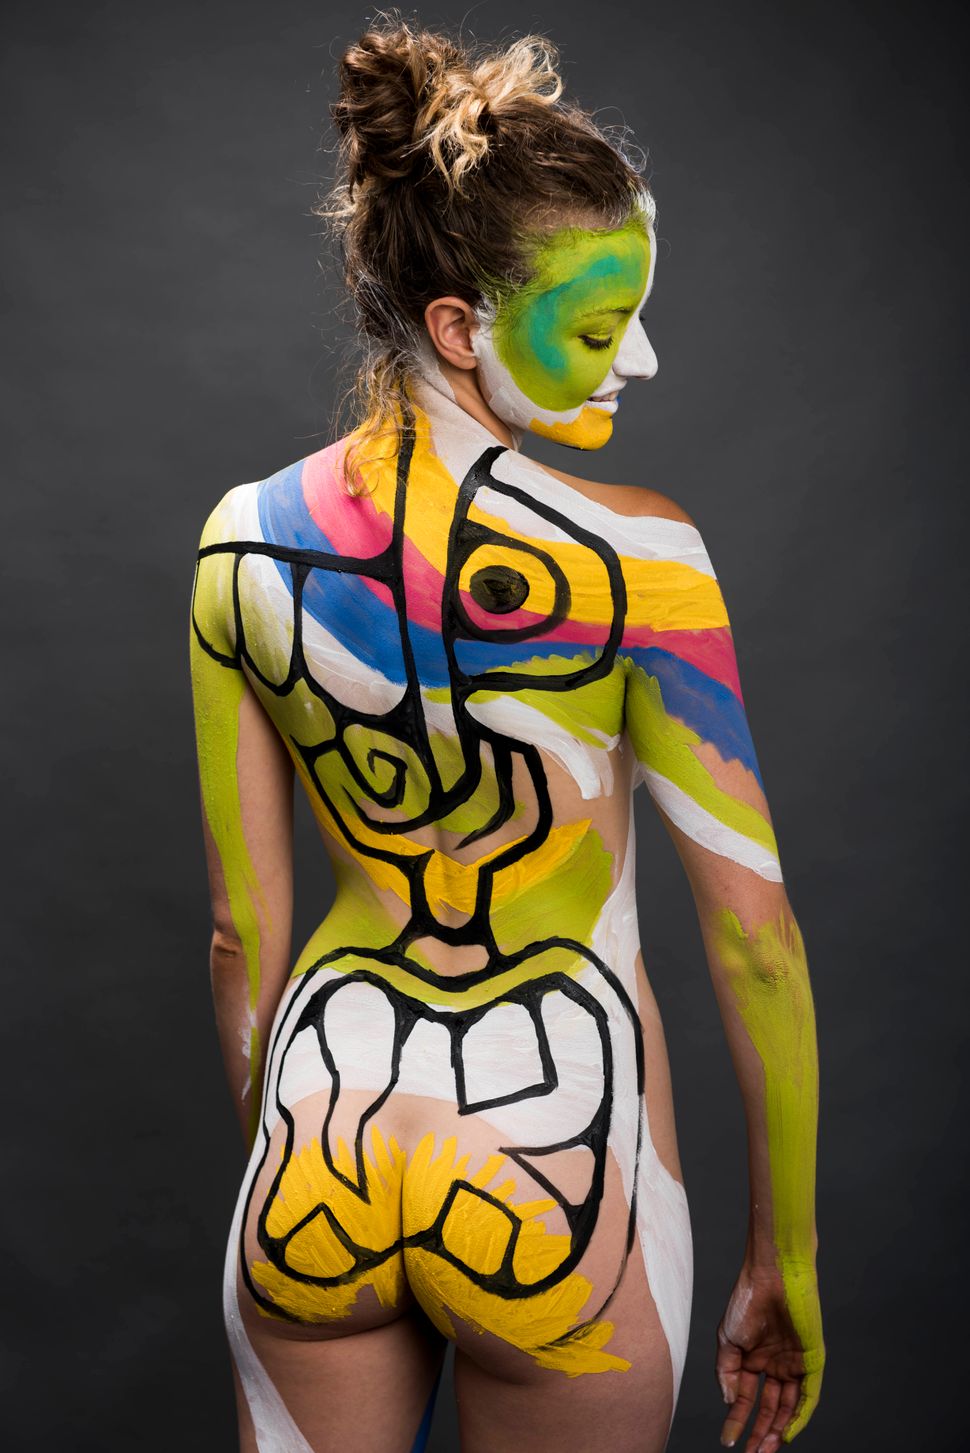 This Is What Its Like To Strip And Get Body Painted For The First